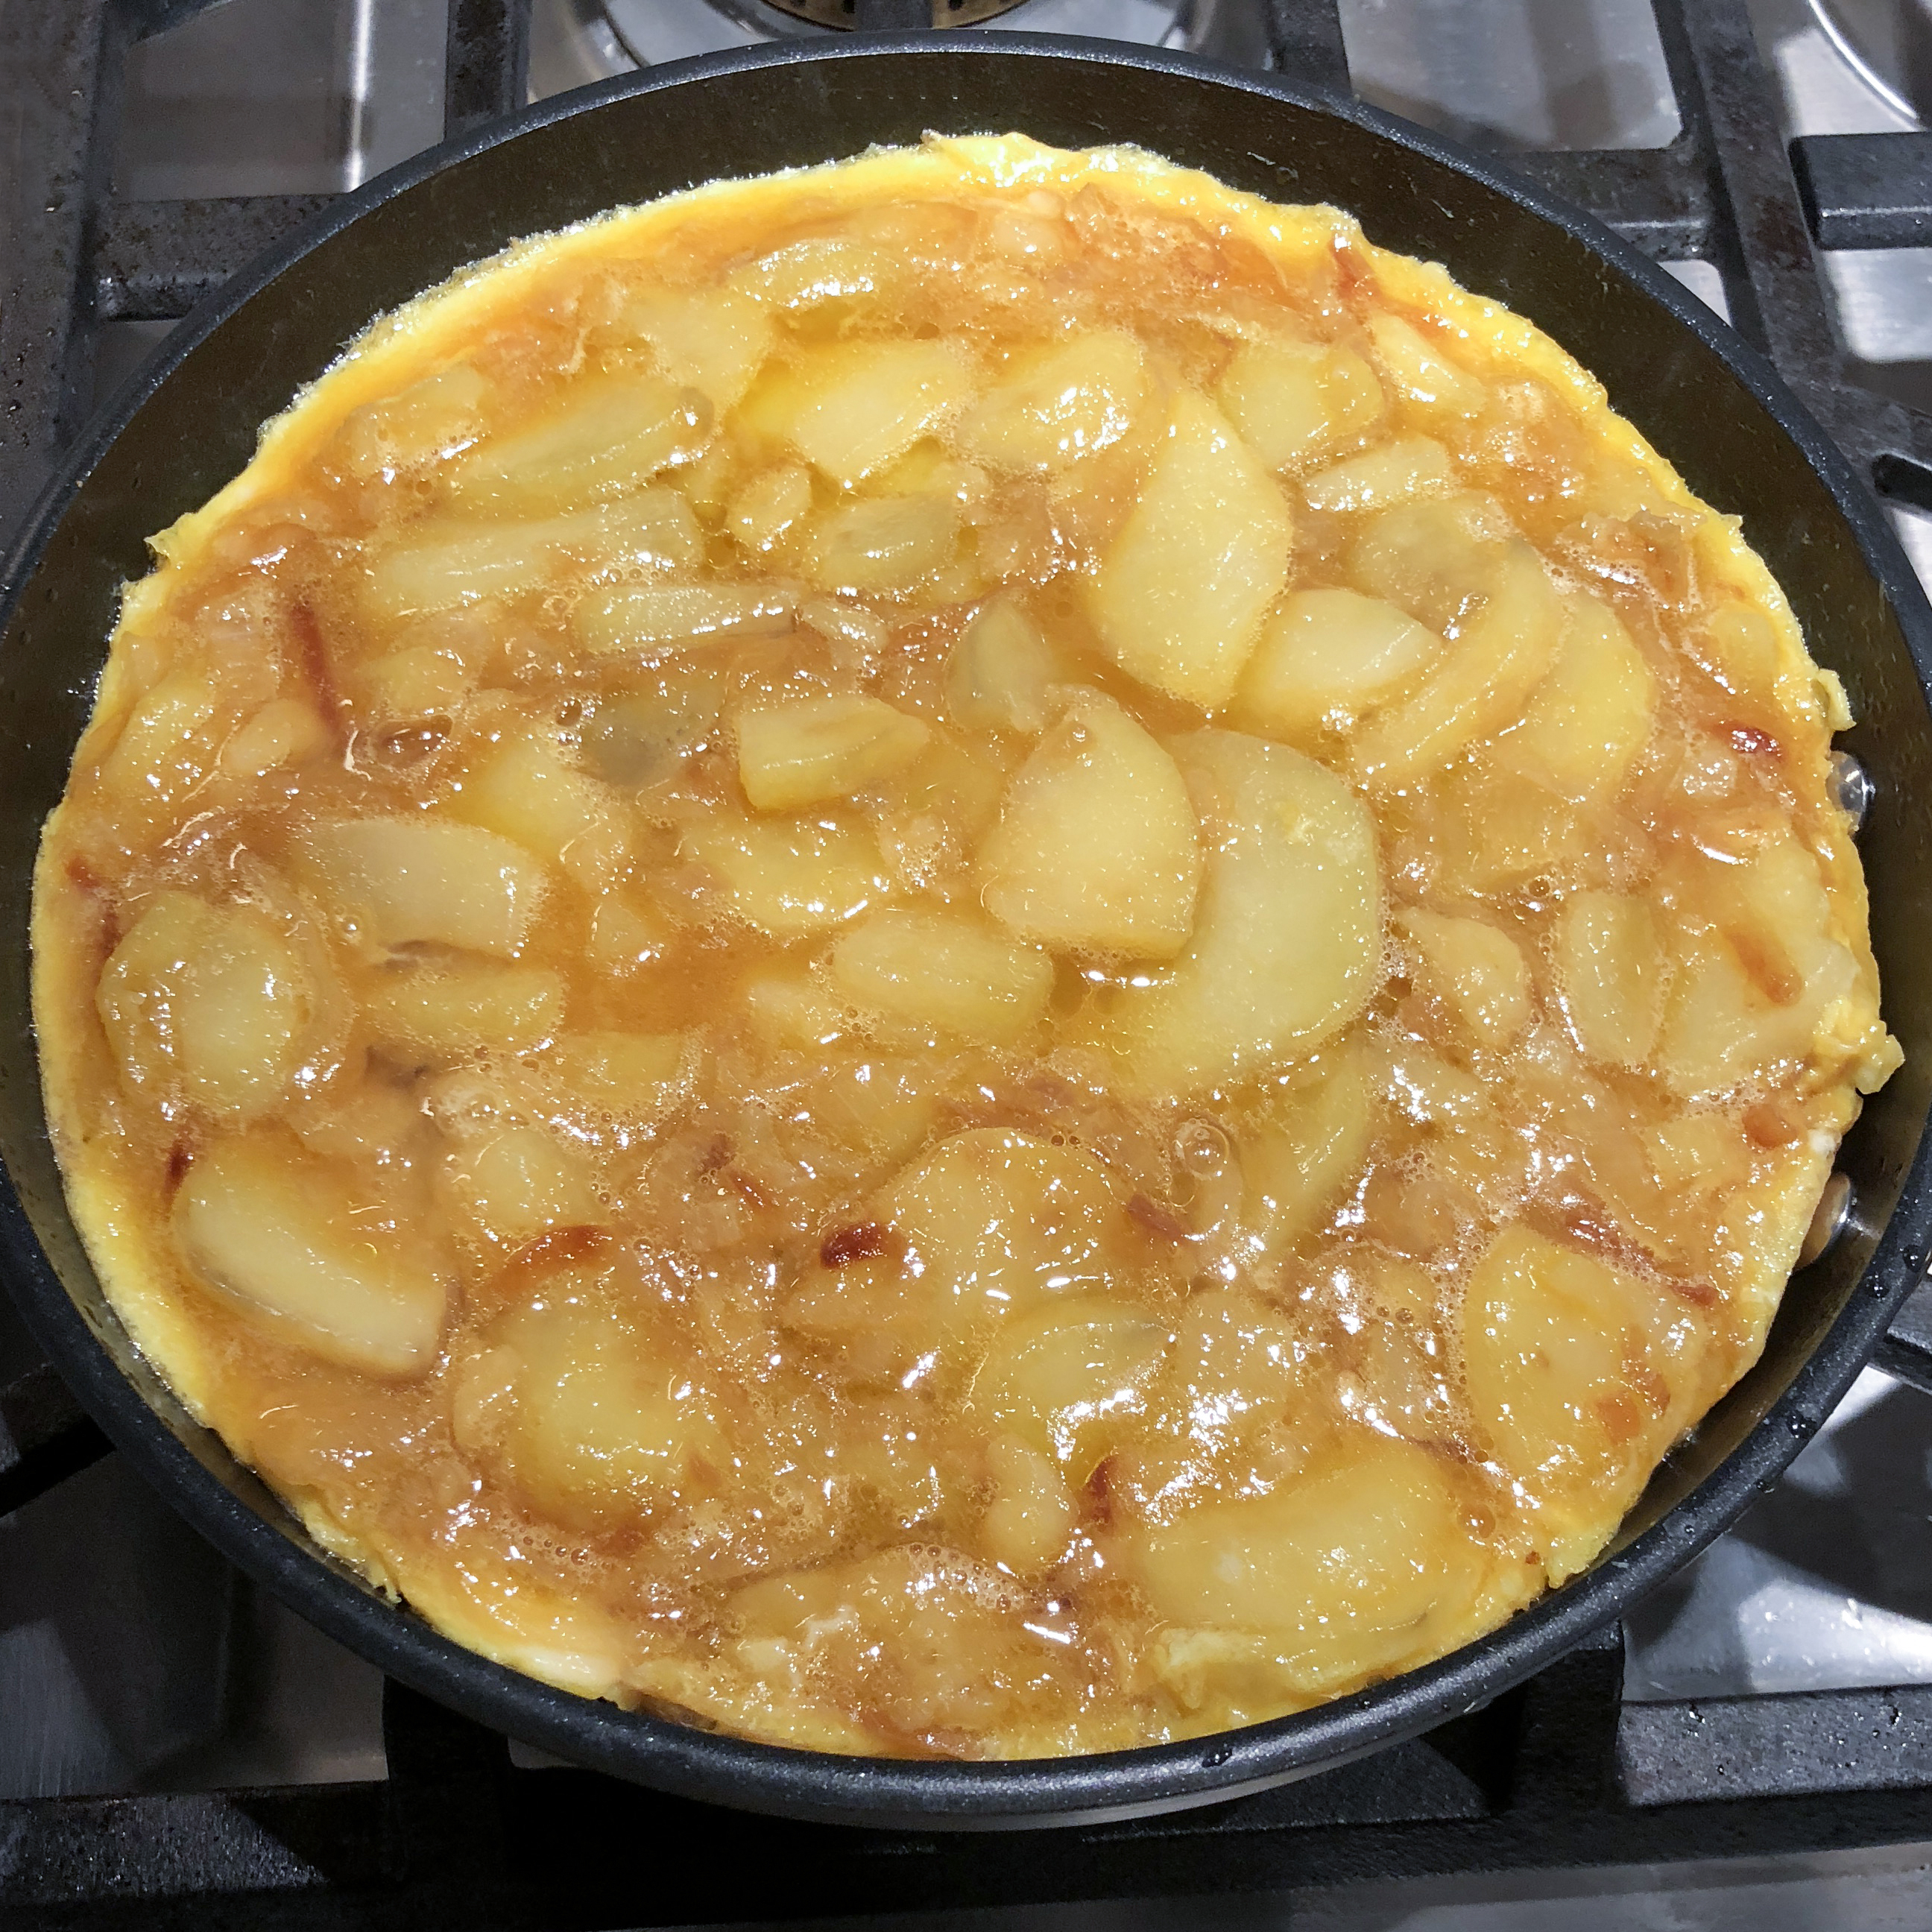 Tortilla Española (Spanish Omelet) cooking in nonstick pan prior to flipping it over.